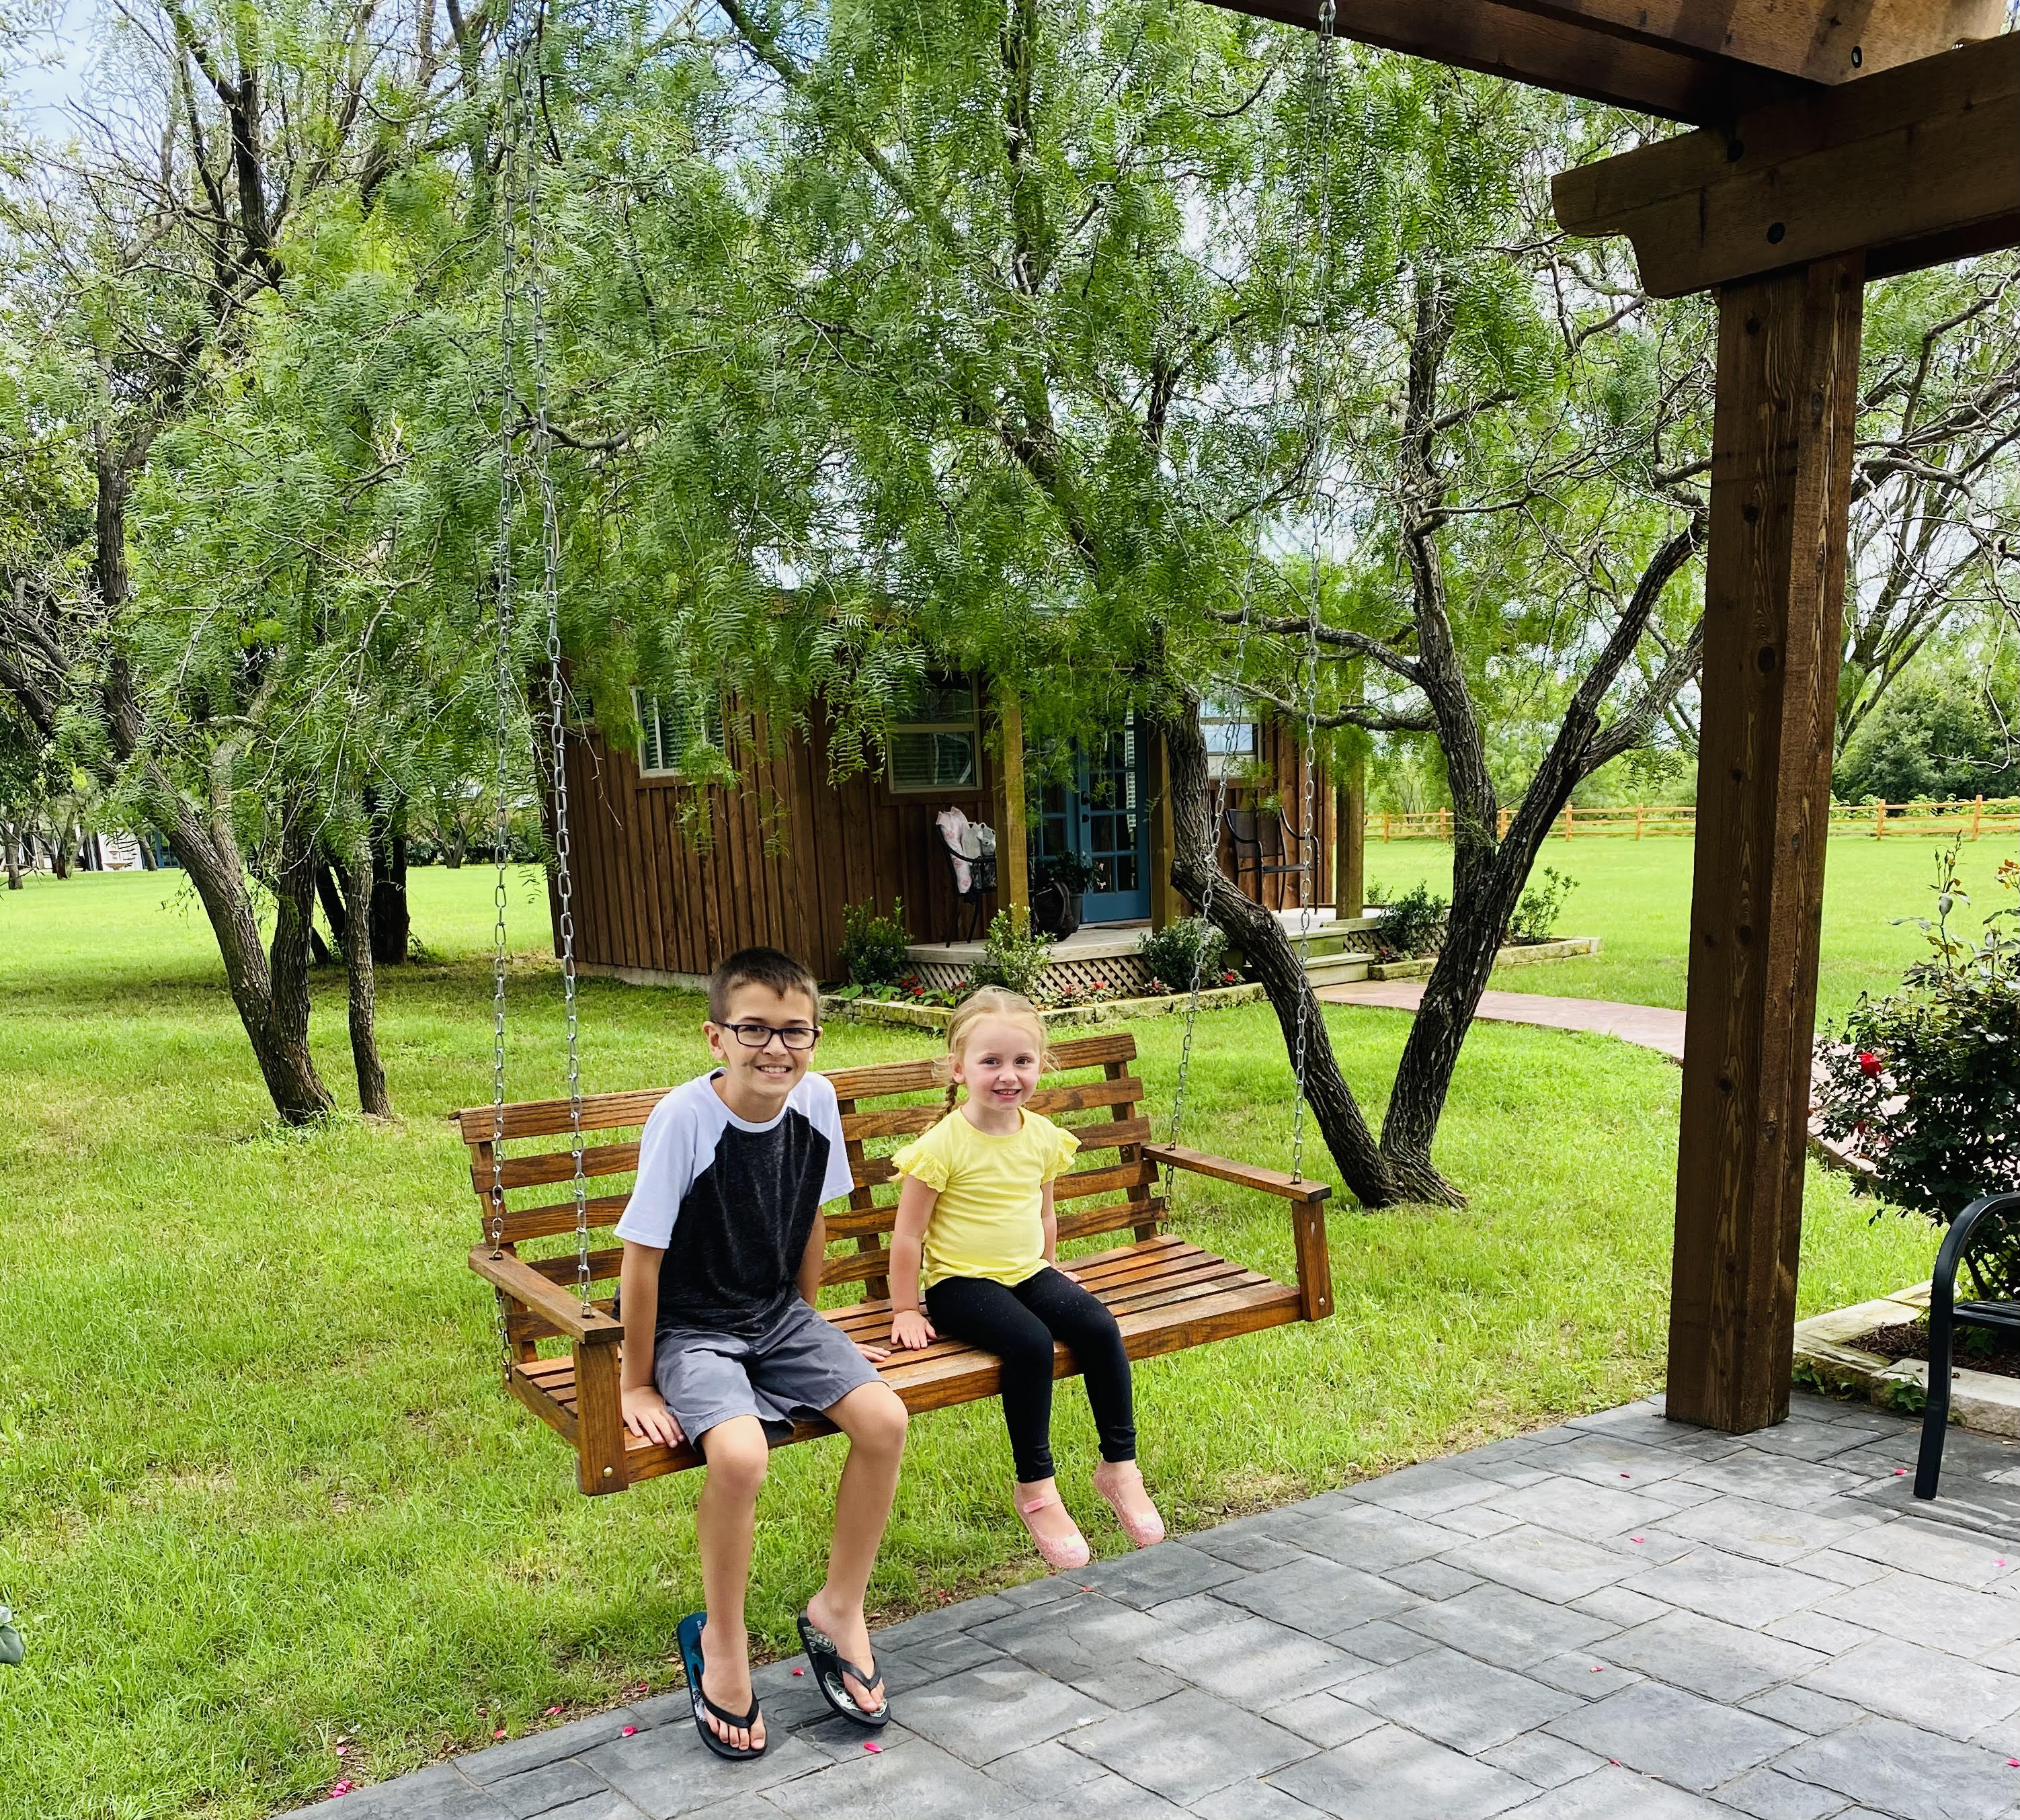 The courtyard in the tiny cabin cluster in Waco Texas